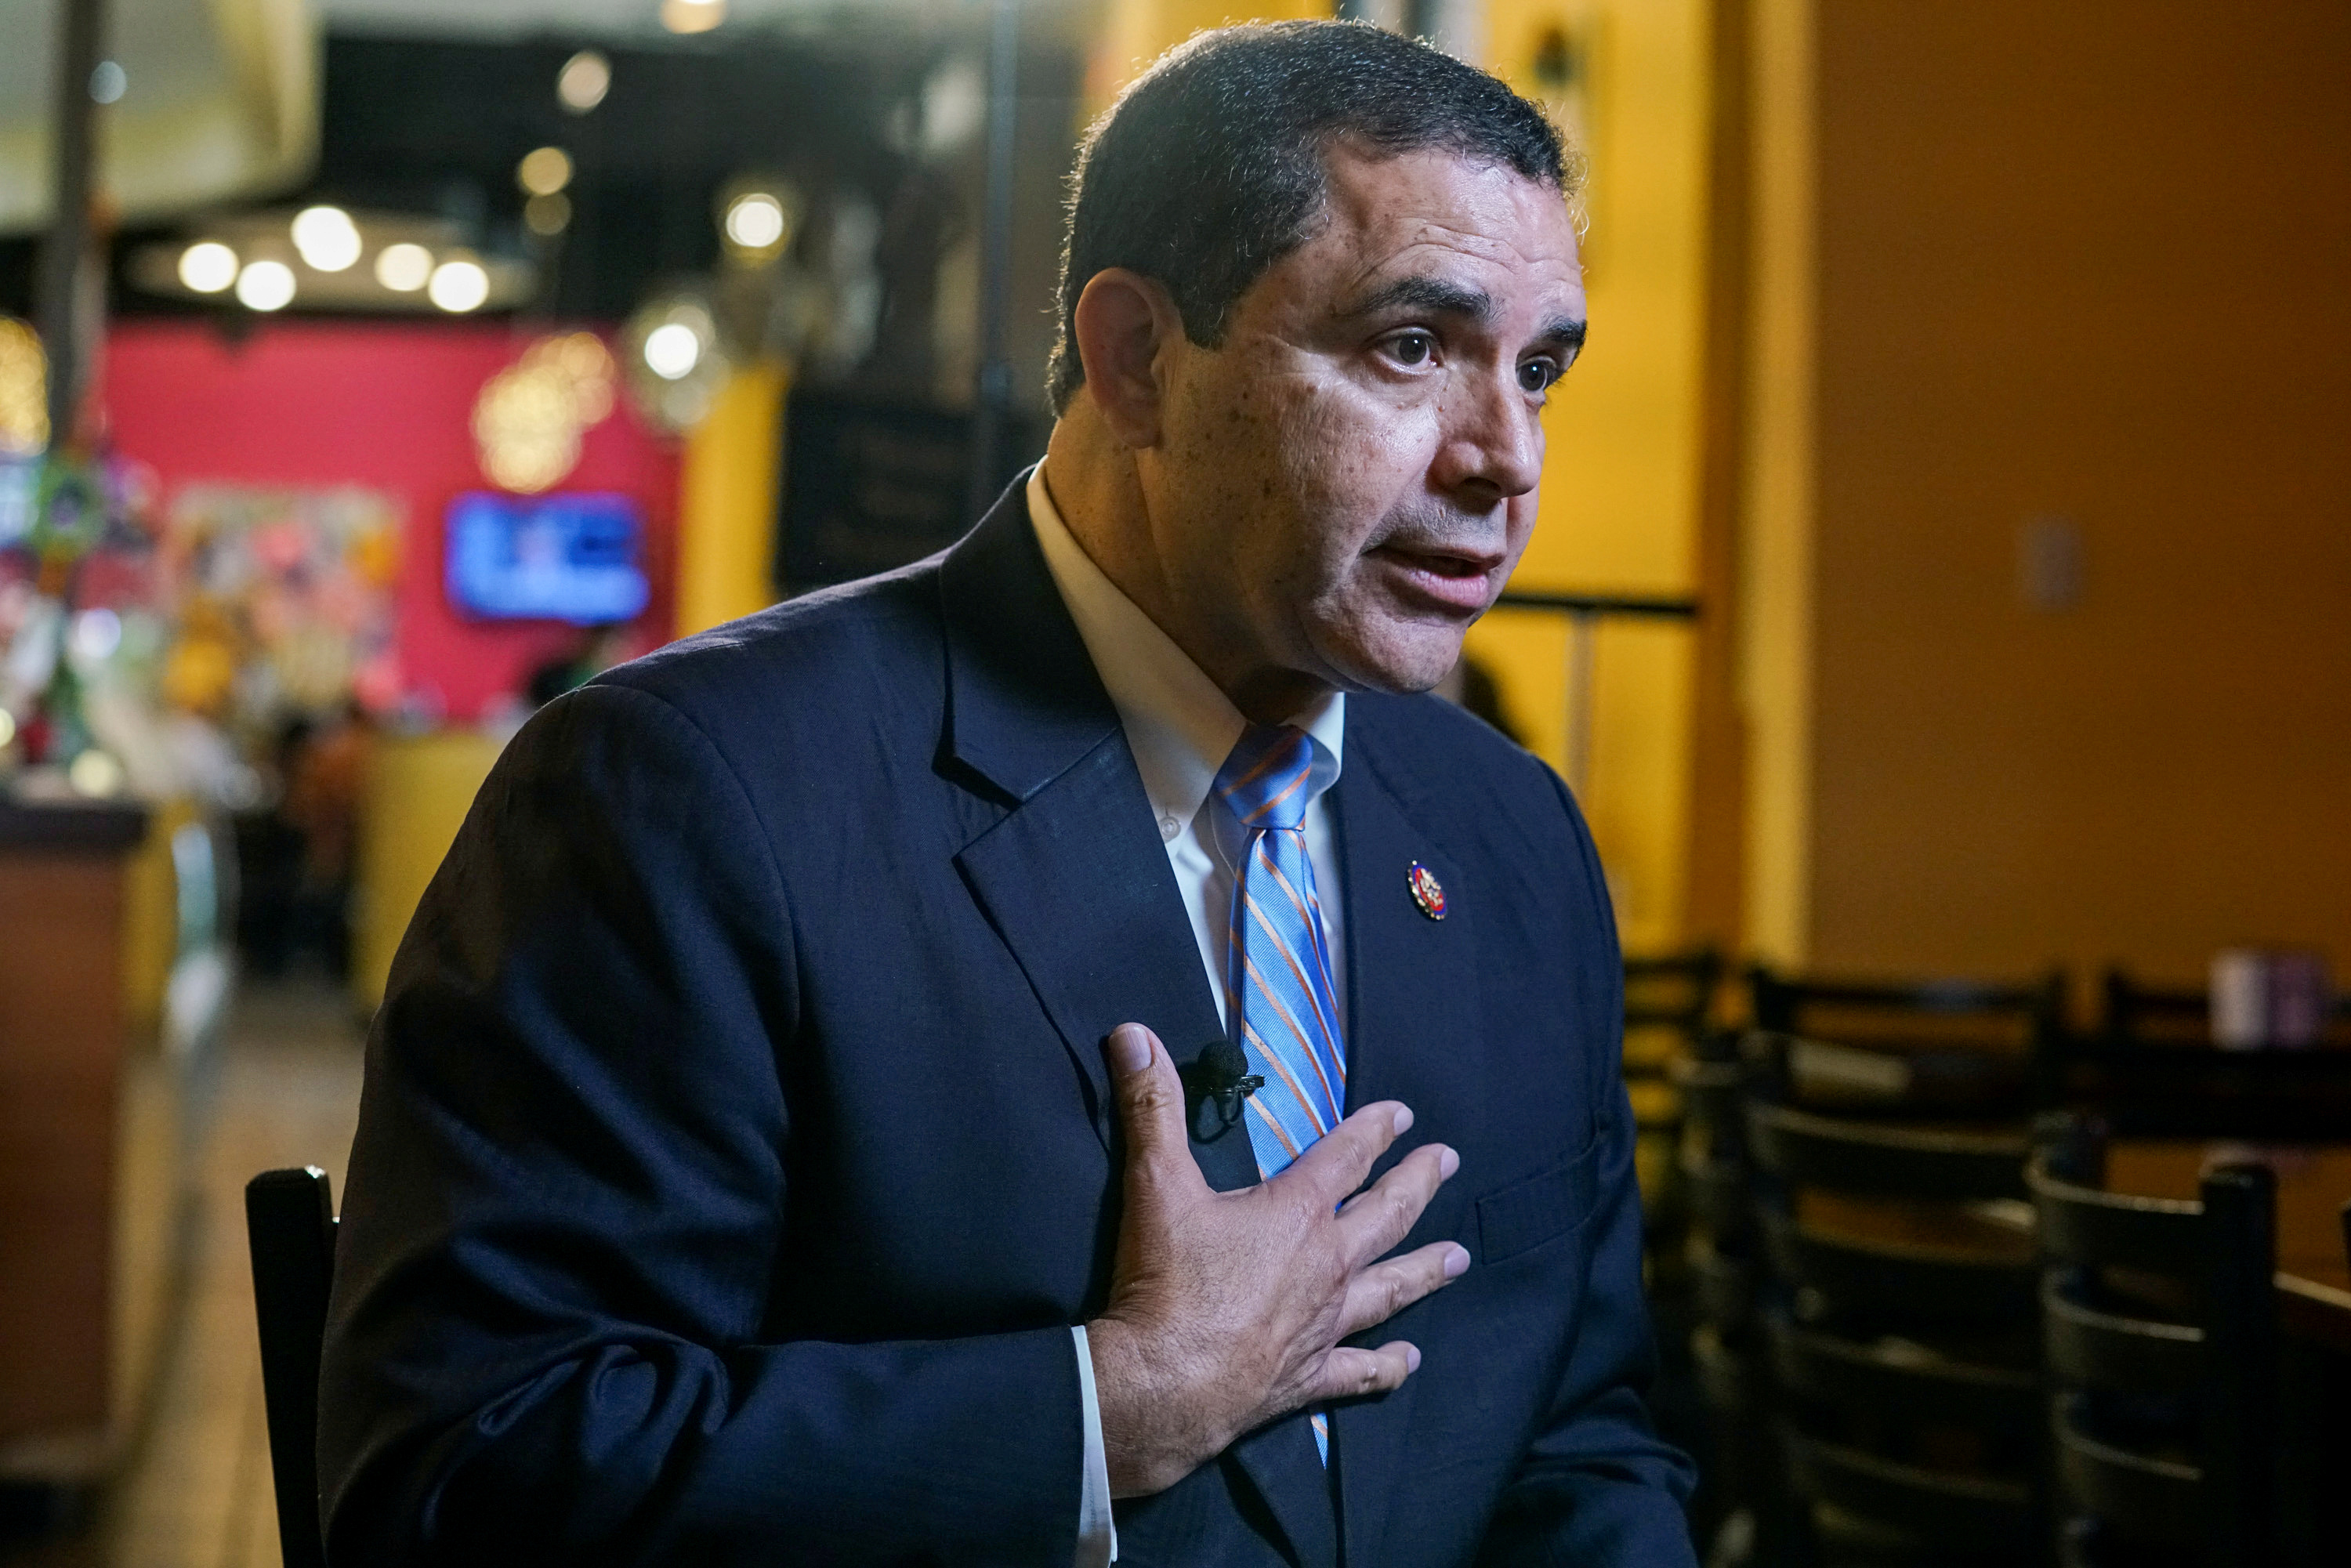 U.S. Rep. Henry Cuellar gives an interview in Laredo, Texas